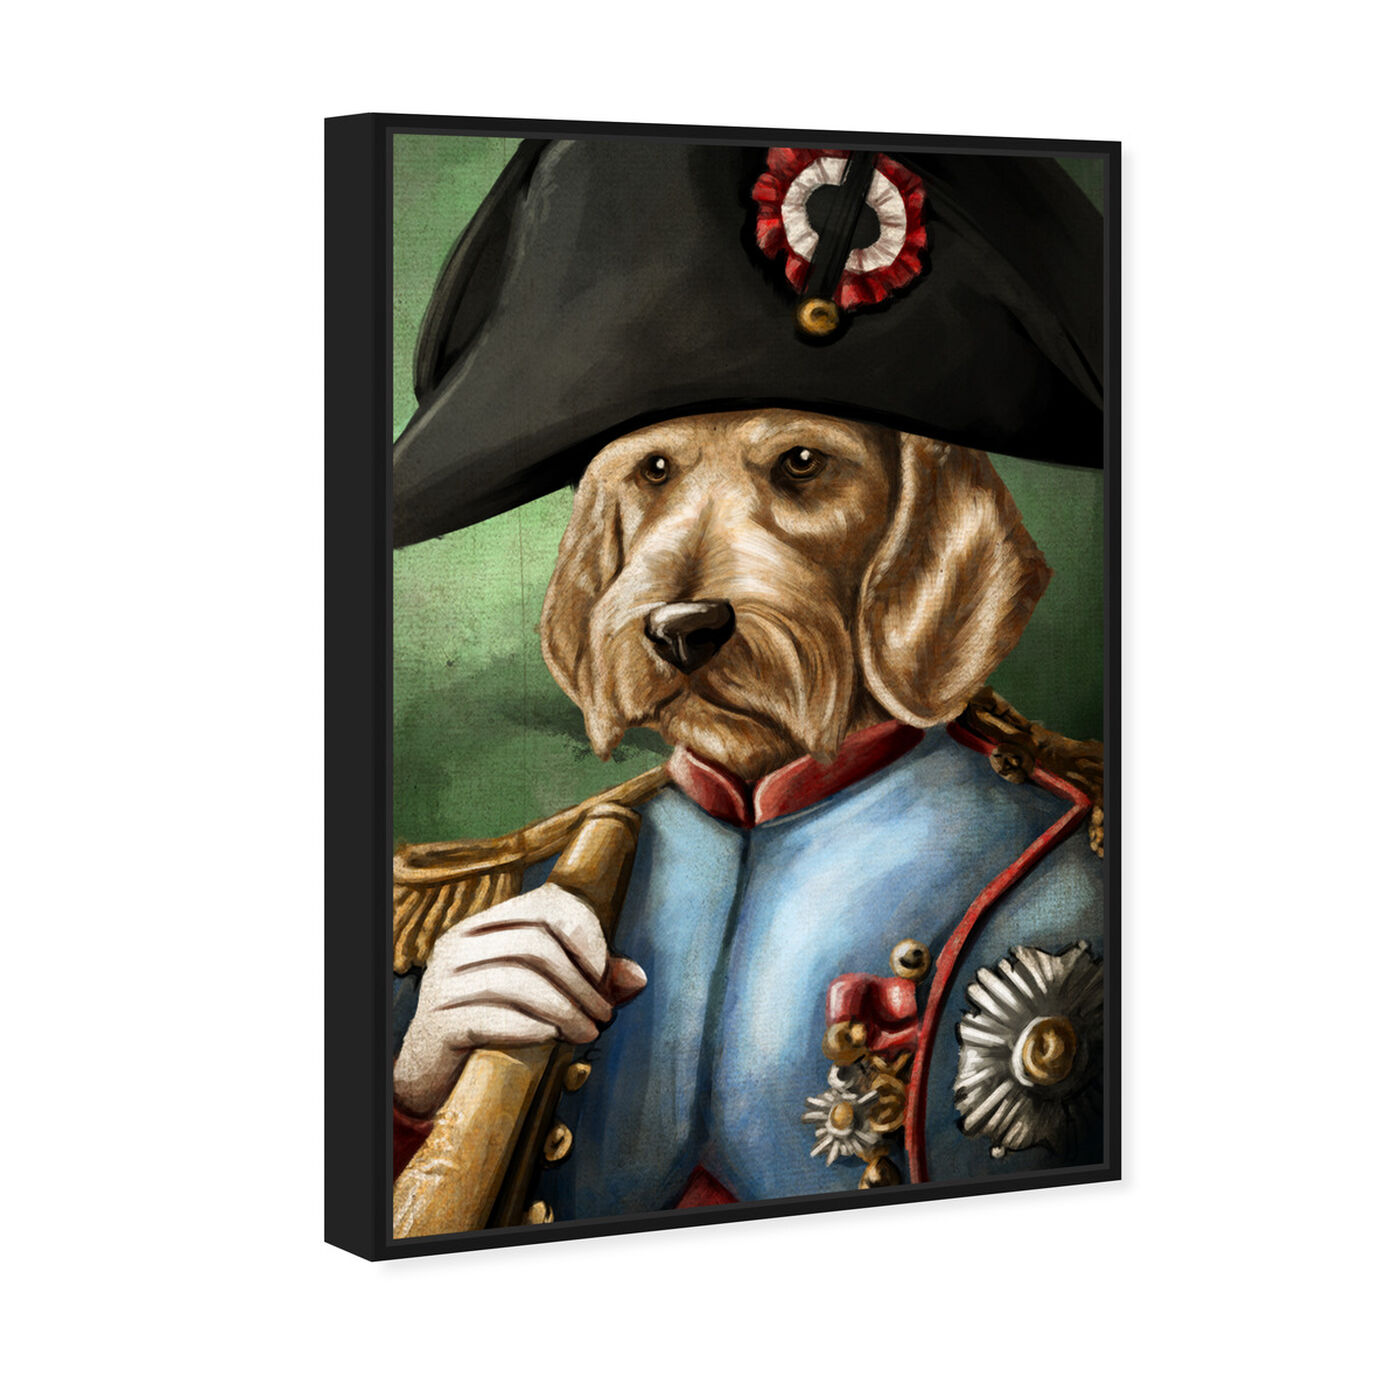 Angled view of Sargent Wired Dashchund featuring animals and dogs and puppies art.